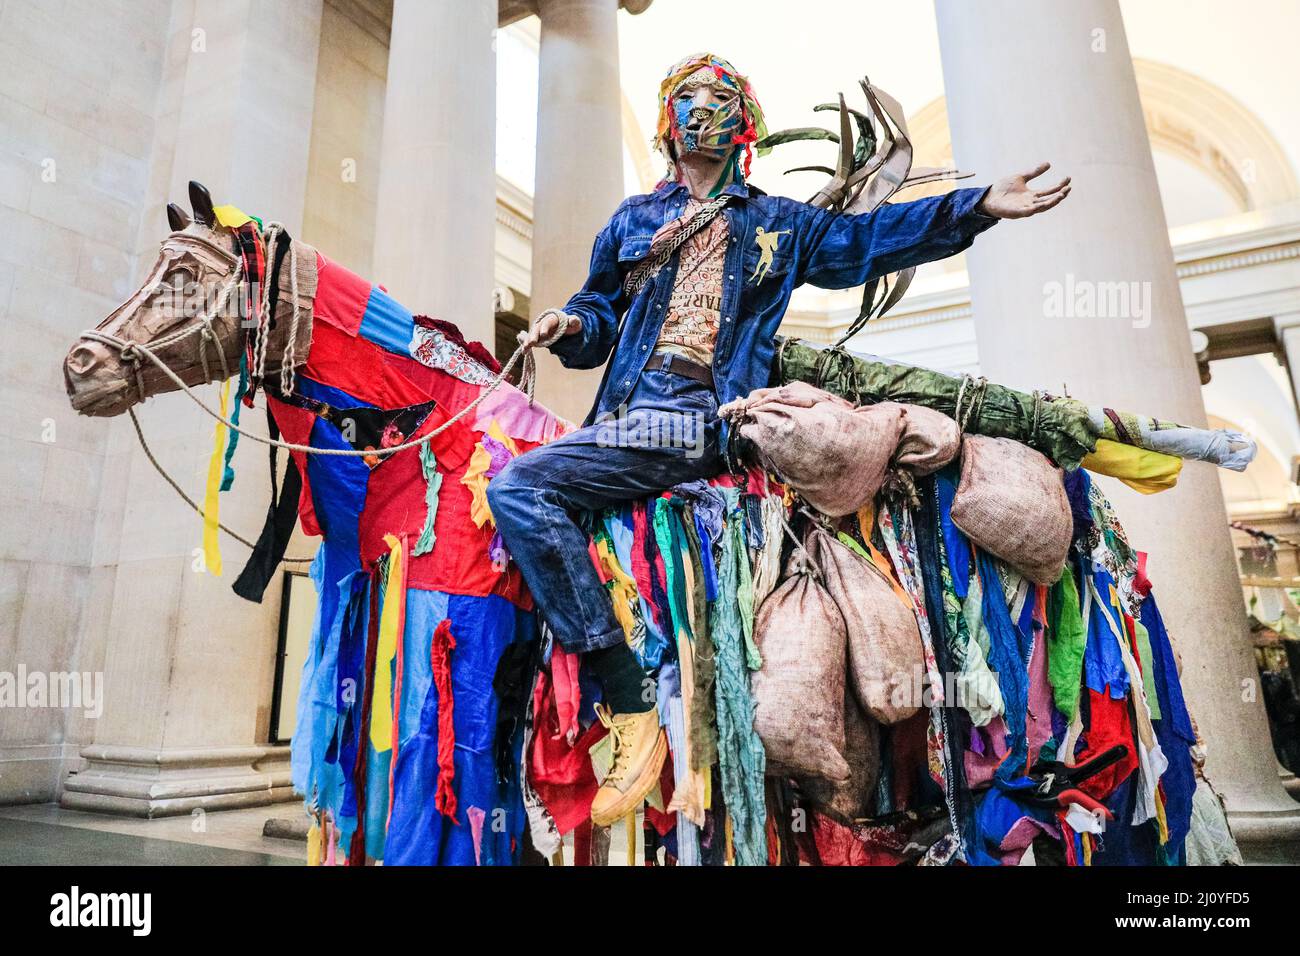 London, UK, 21st March 2022. Detail, 'The Procession', which is one large installation with many different elements. Influence of both Indian and Indo-Caribbean culture, including many carnival elements, can be seen. According to Locke, 'The Procession' is not a historic textbook, but rather an 'extended poem of contrasting references and imagery. The annual Tate Britain Commission has been undertaken by Guyanese-British artist Hew Locke with 'The Procession'. Credit: Imageplotter/Alamy Live News Stock Photo